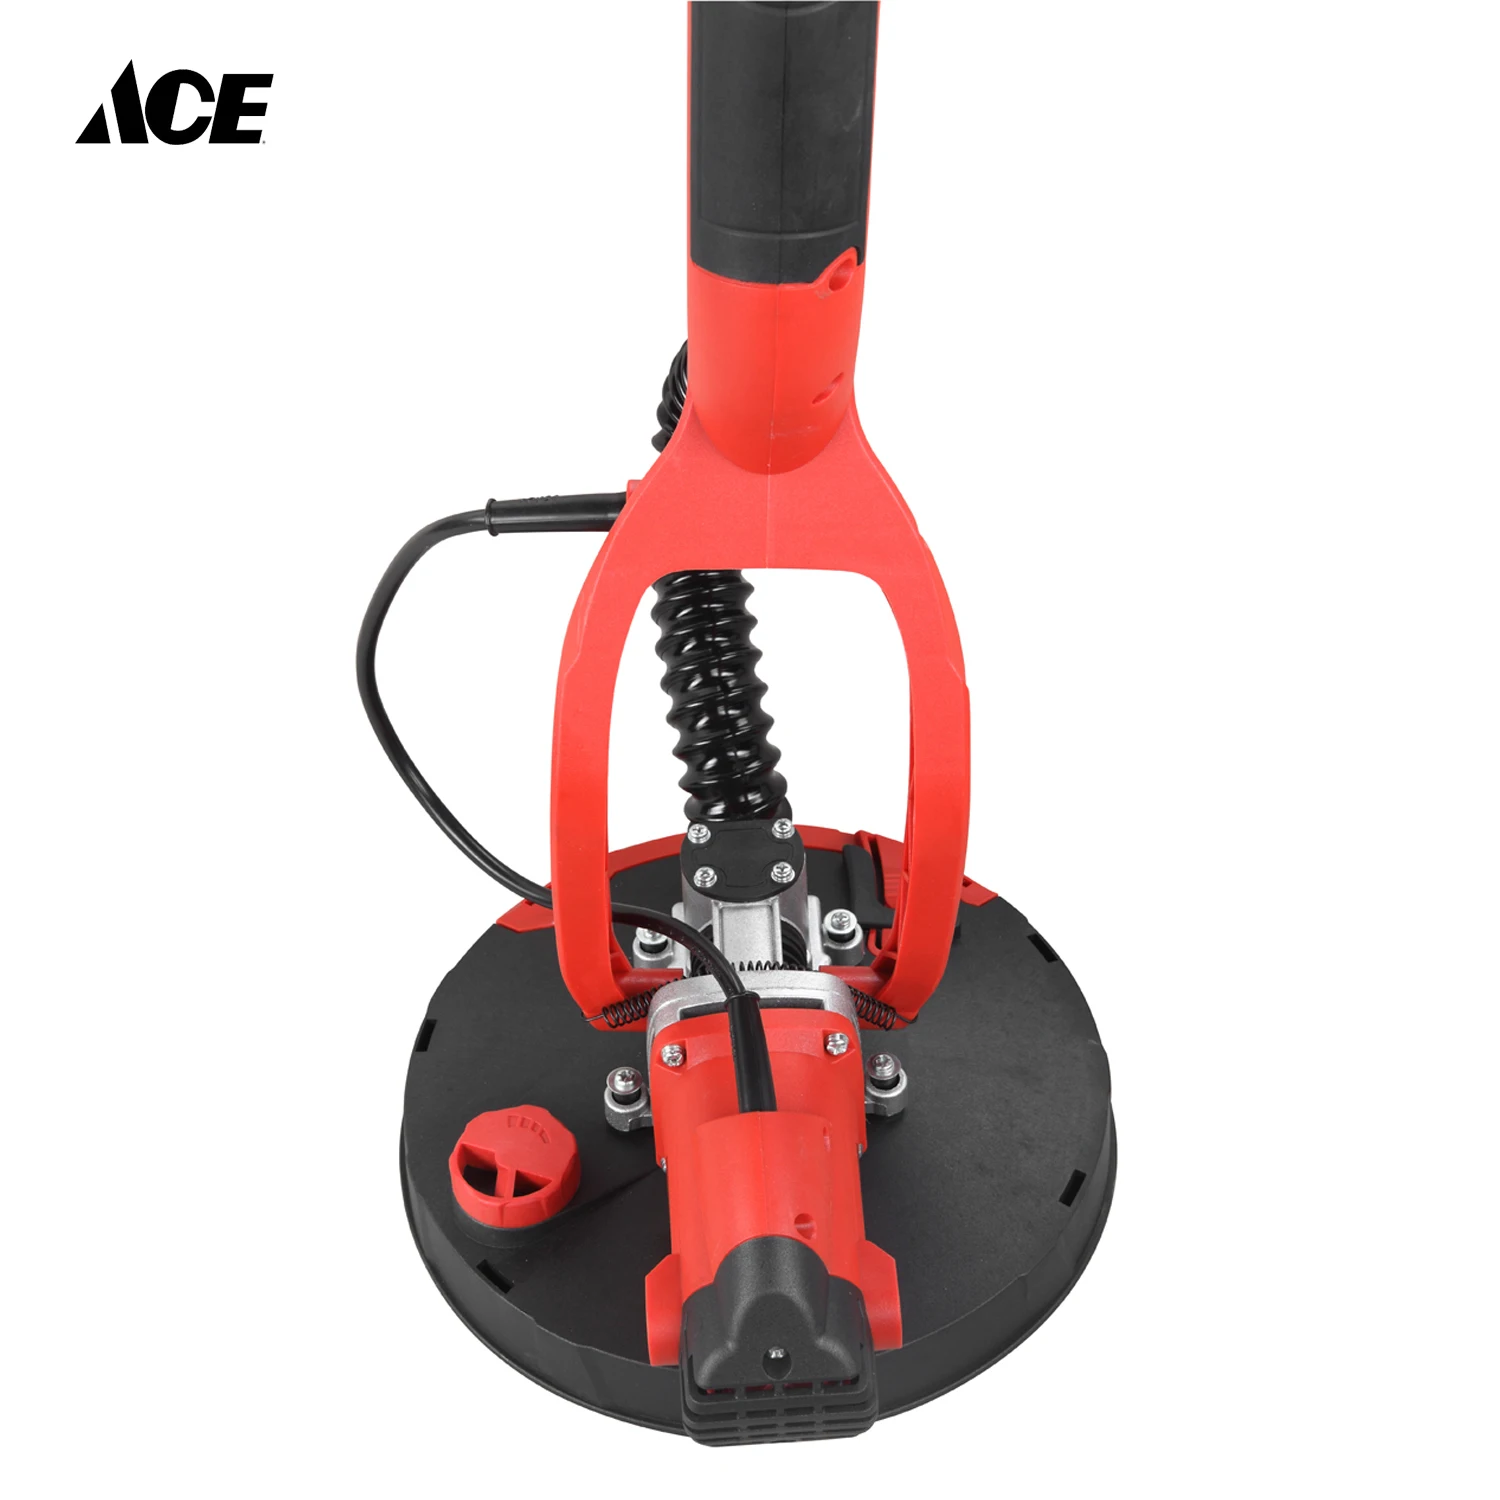 Plaster walls and Ceilings Electric Drywall Sander